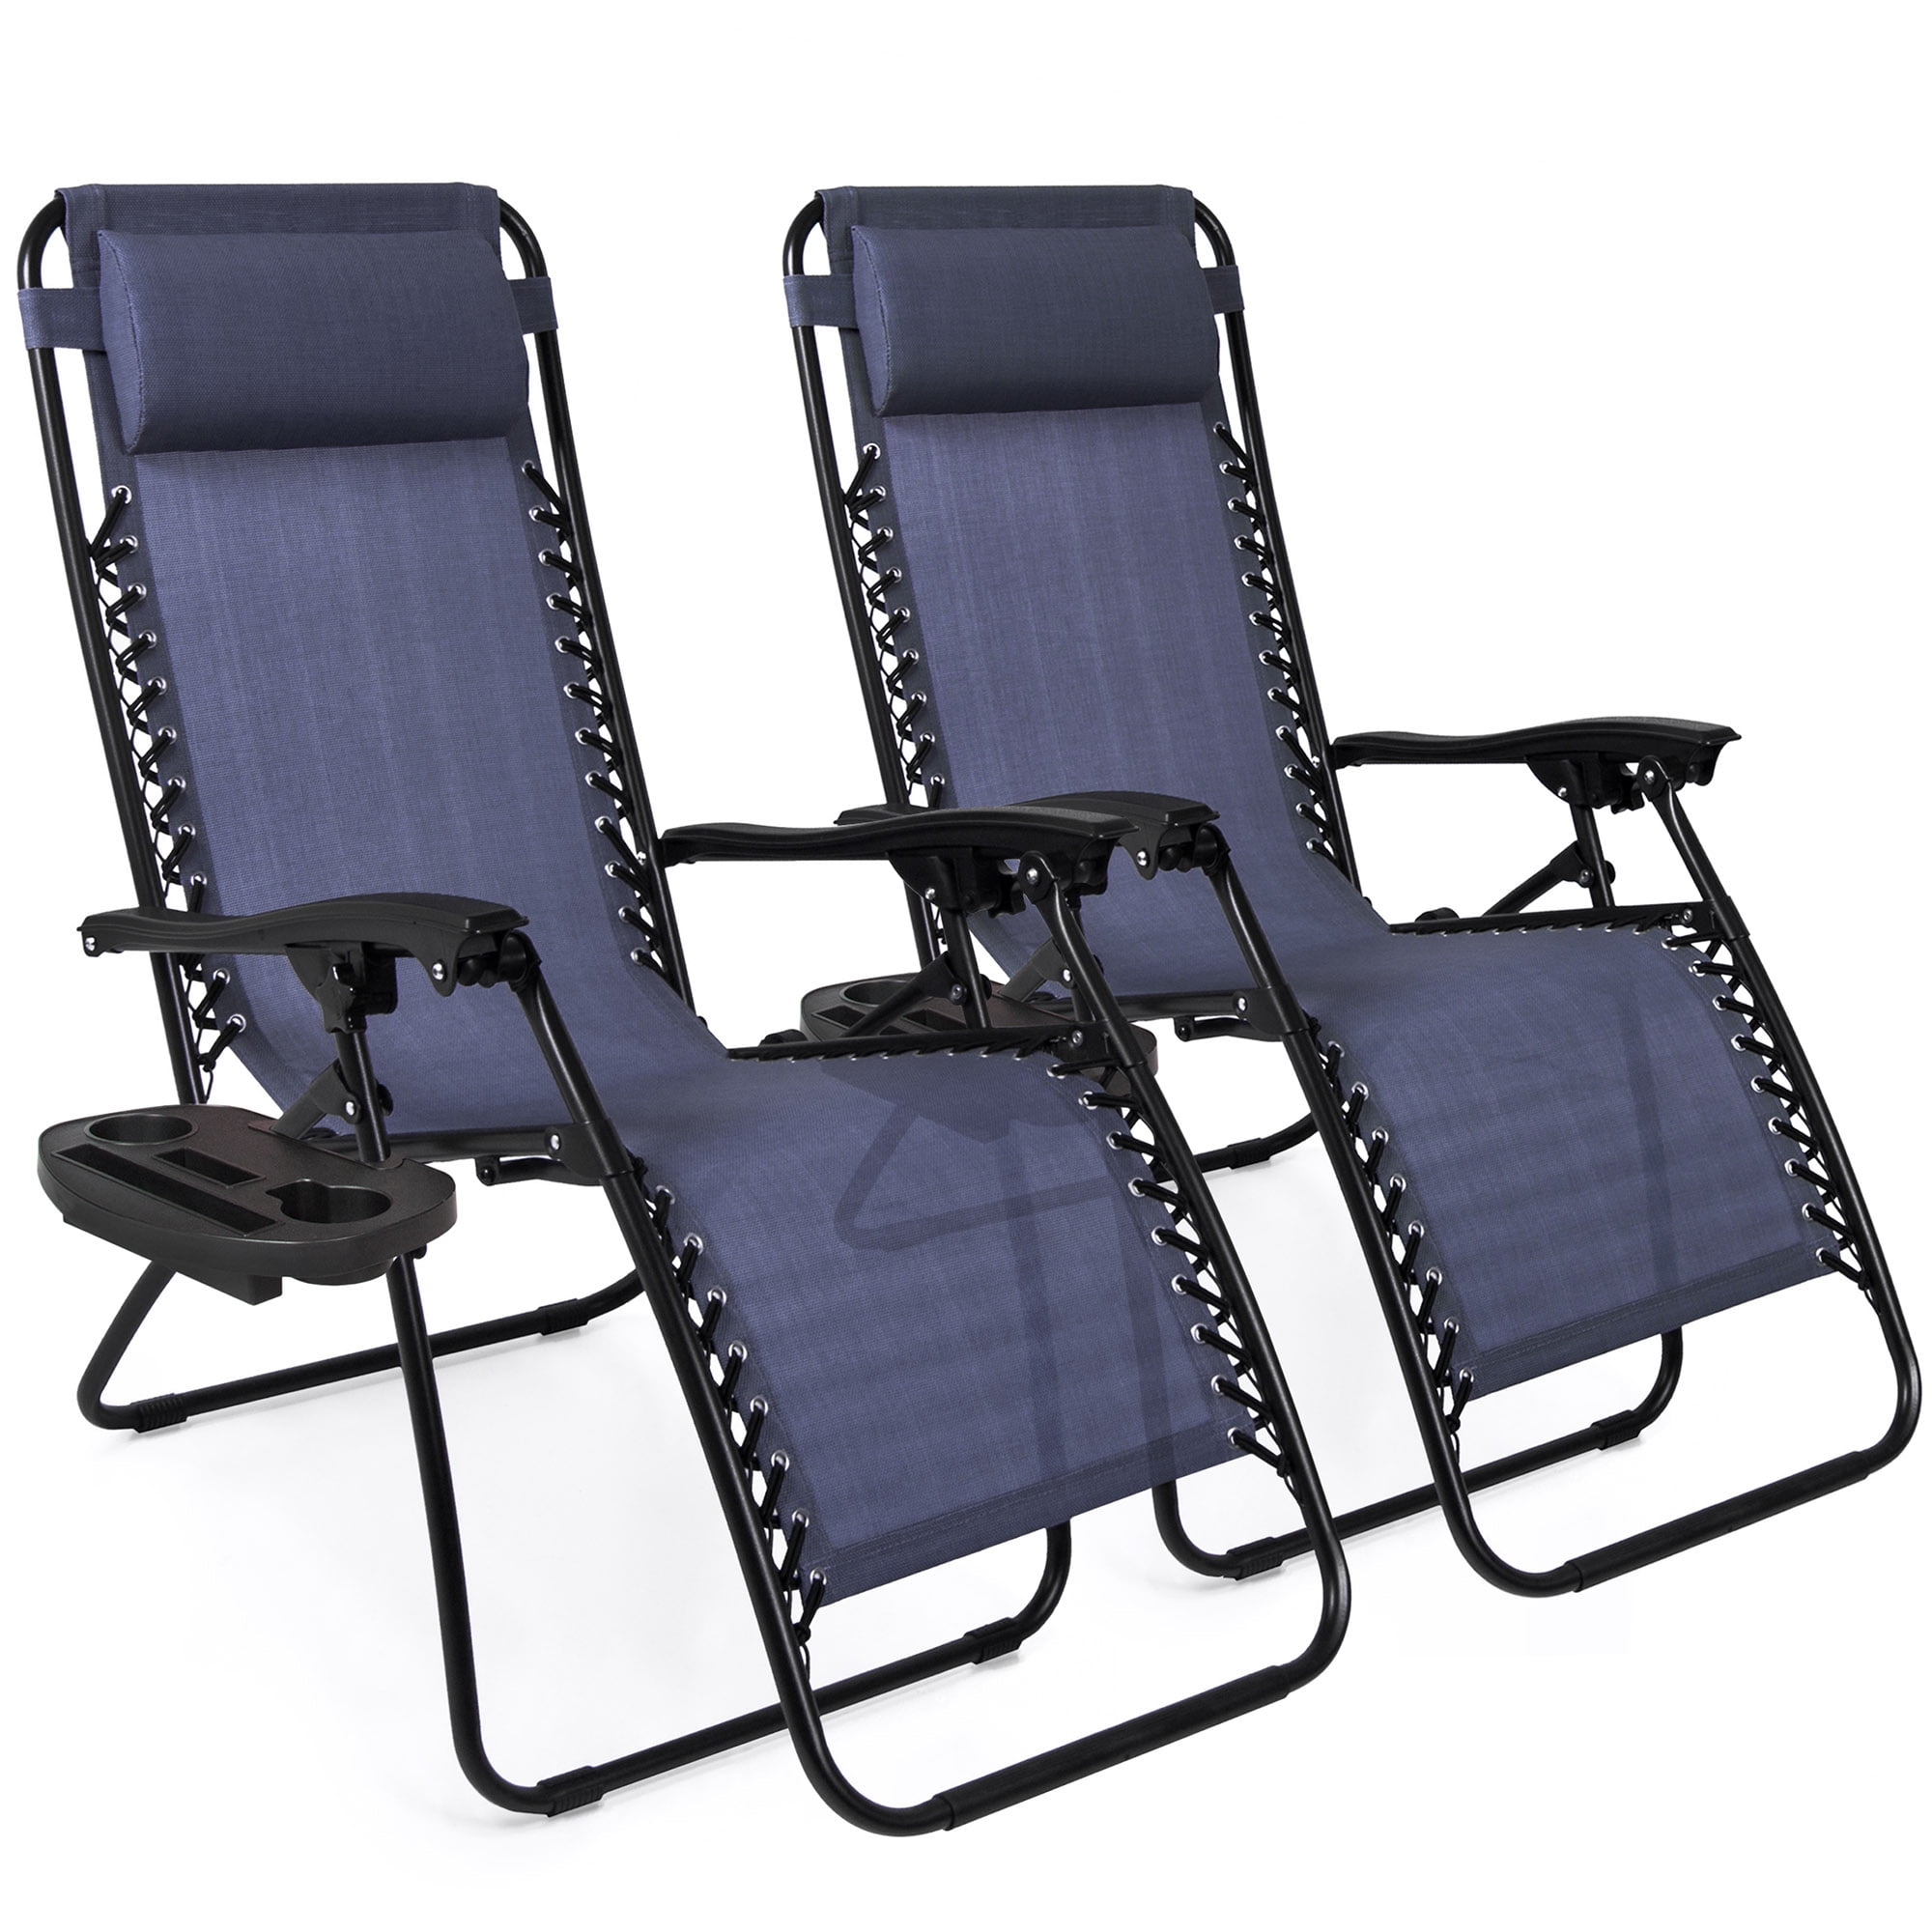 Best Choice Products Set of 2 Adjustable Zero Gravity Lounge Chair Recliners for Patio, Pool w/ Cup Holders - Navy Blue